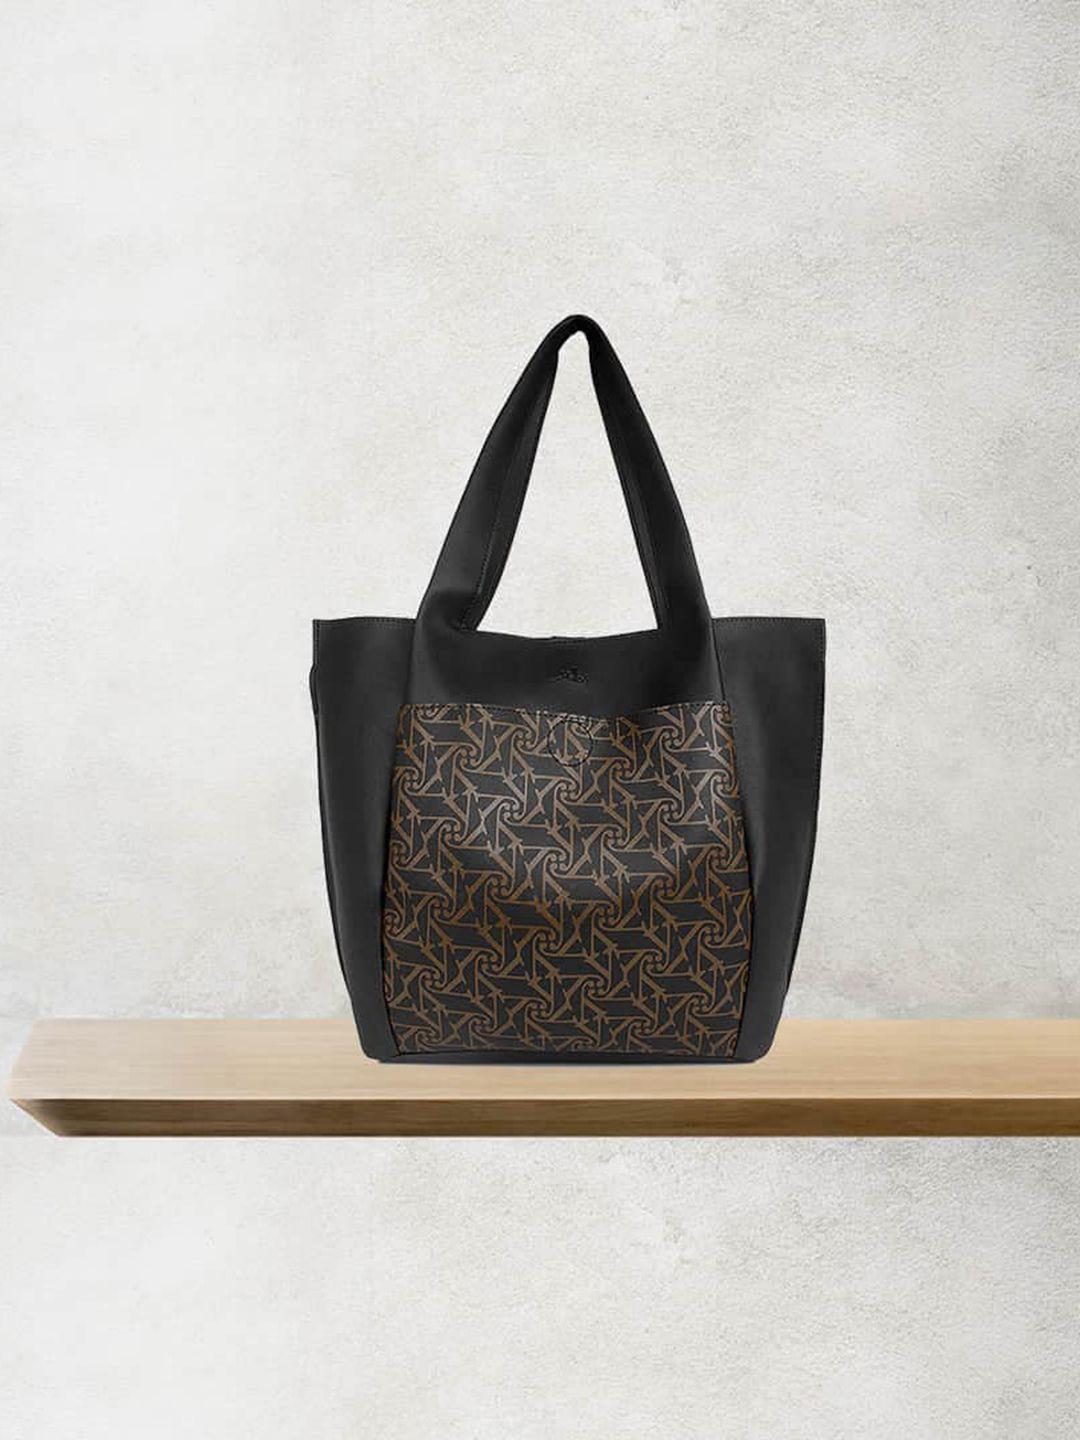 yelloe black printed oversized structured tote bag with cut work